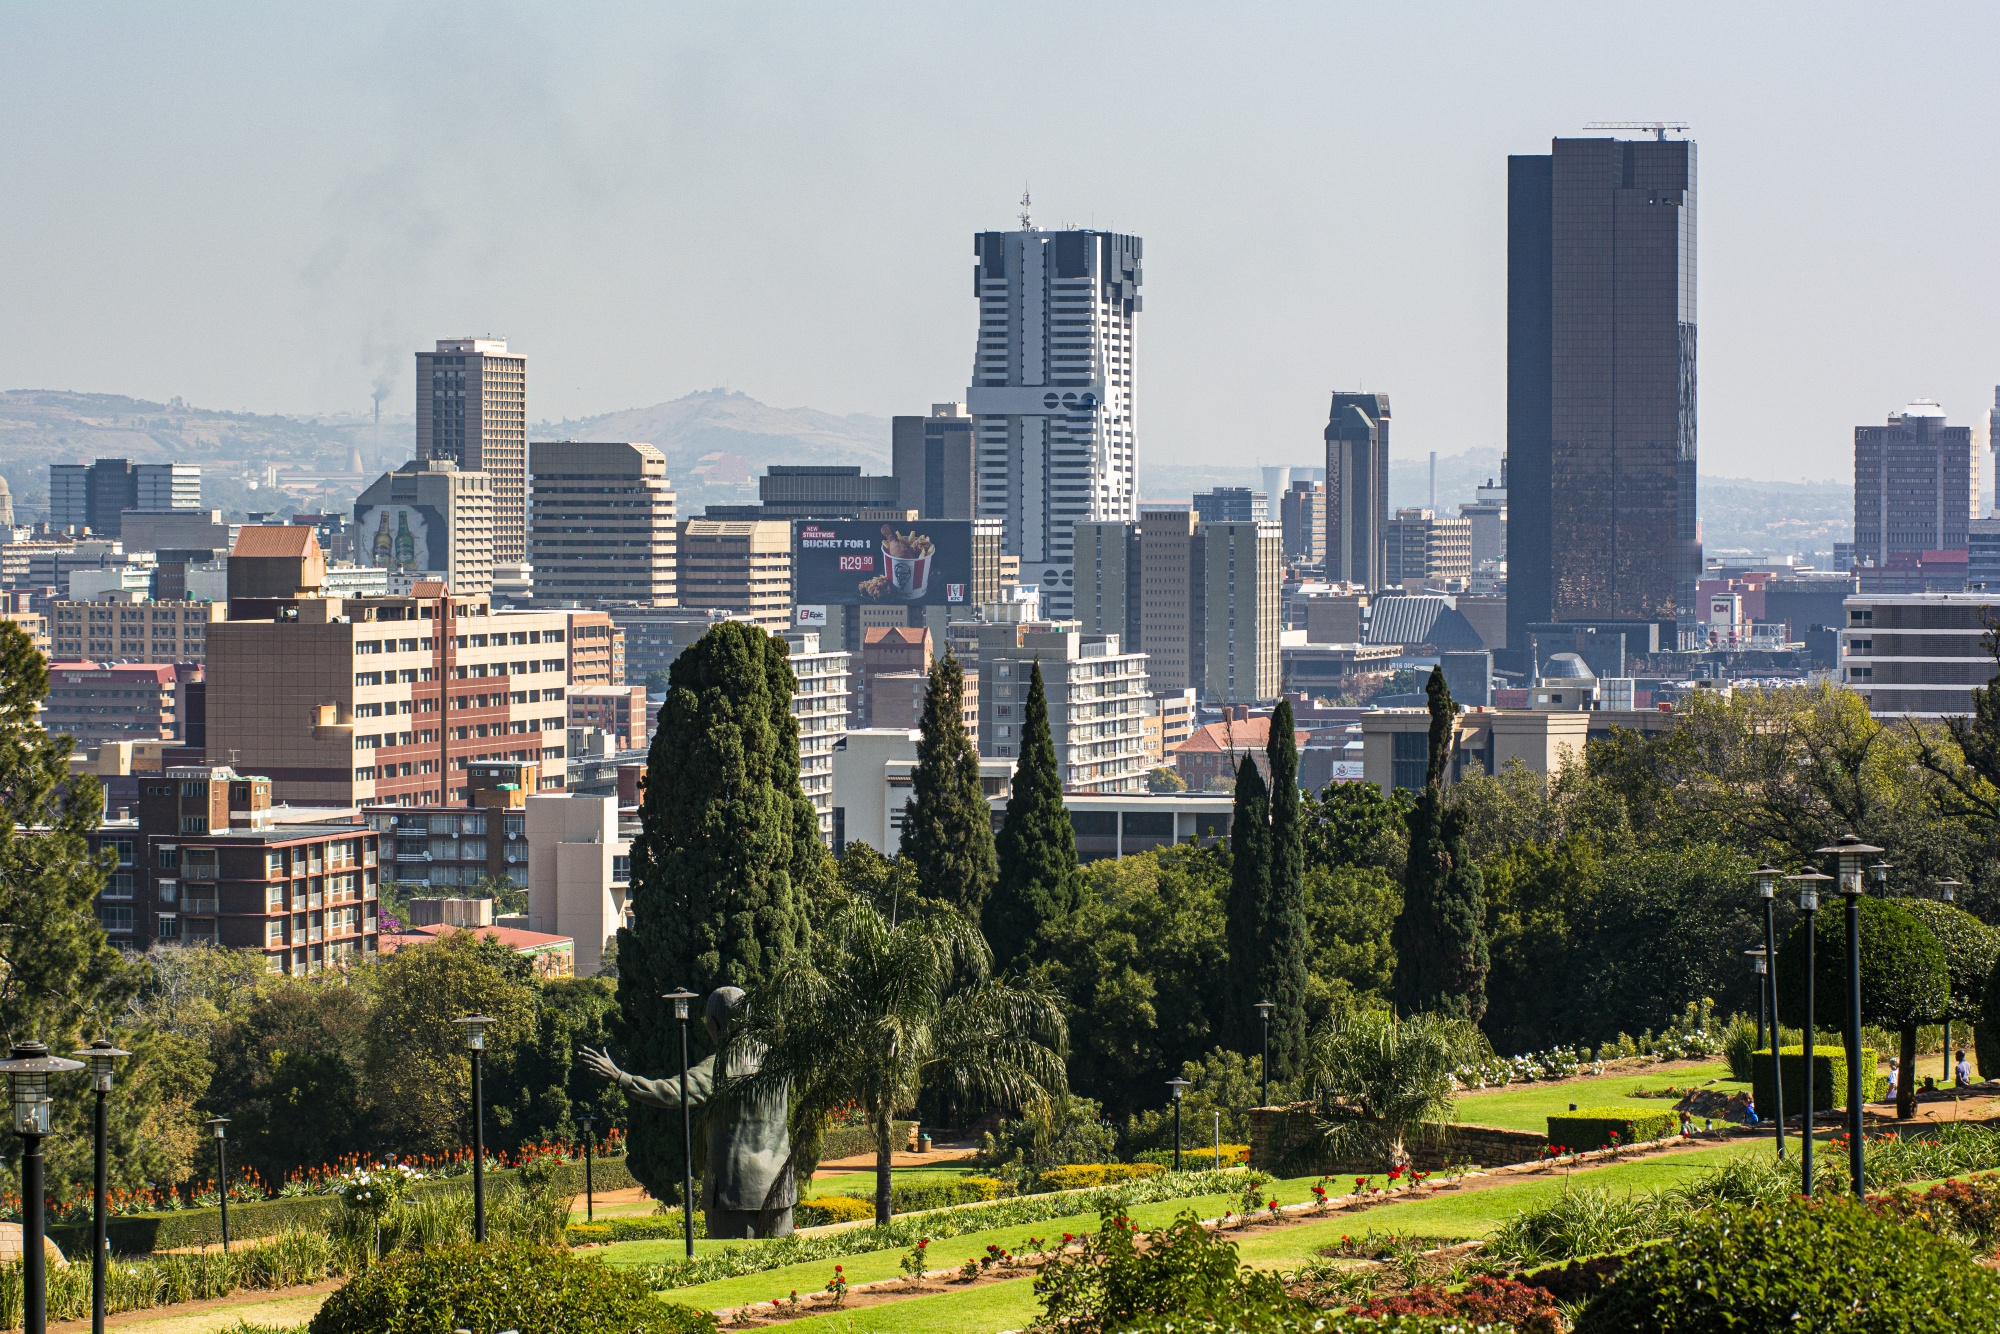 The South African Reserve Bank, right, stands on the skyline in Pretoria.